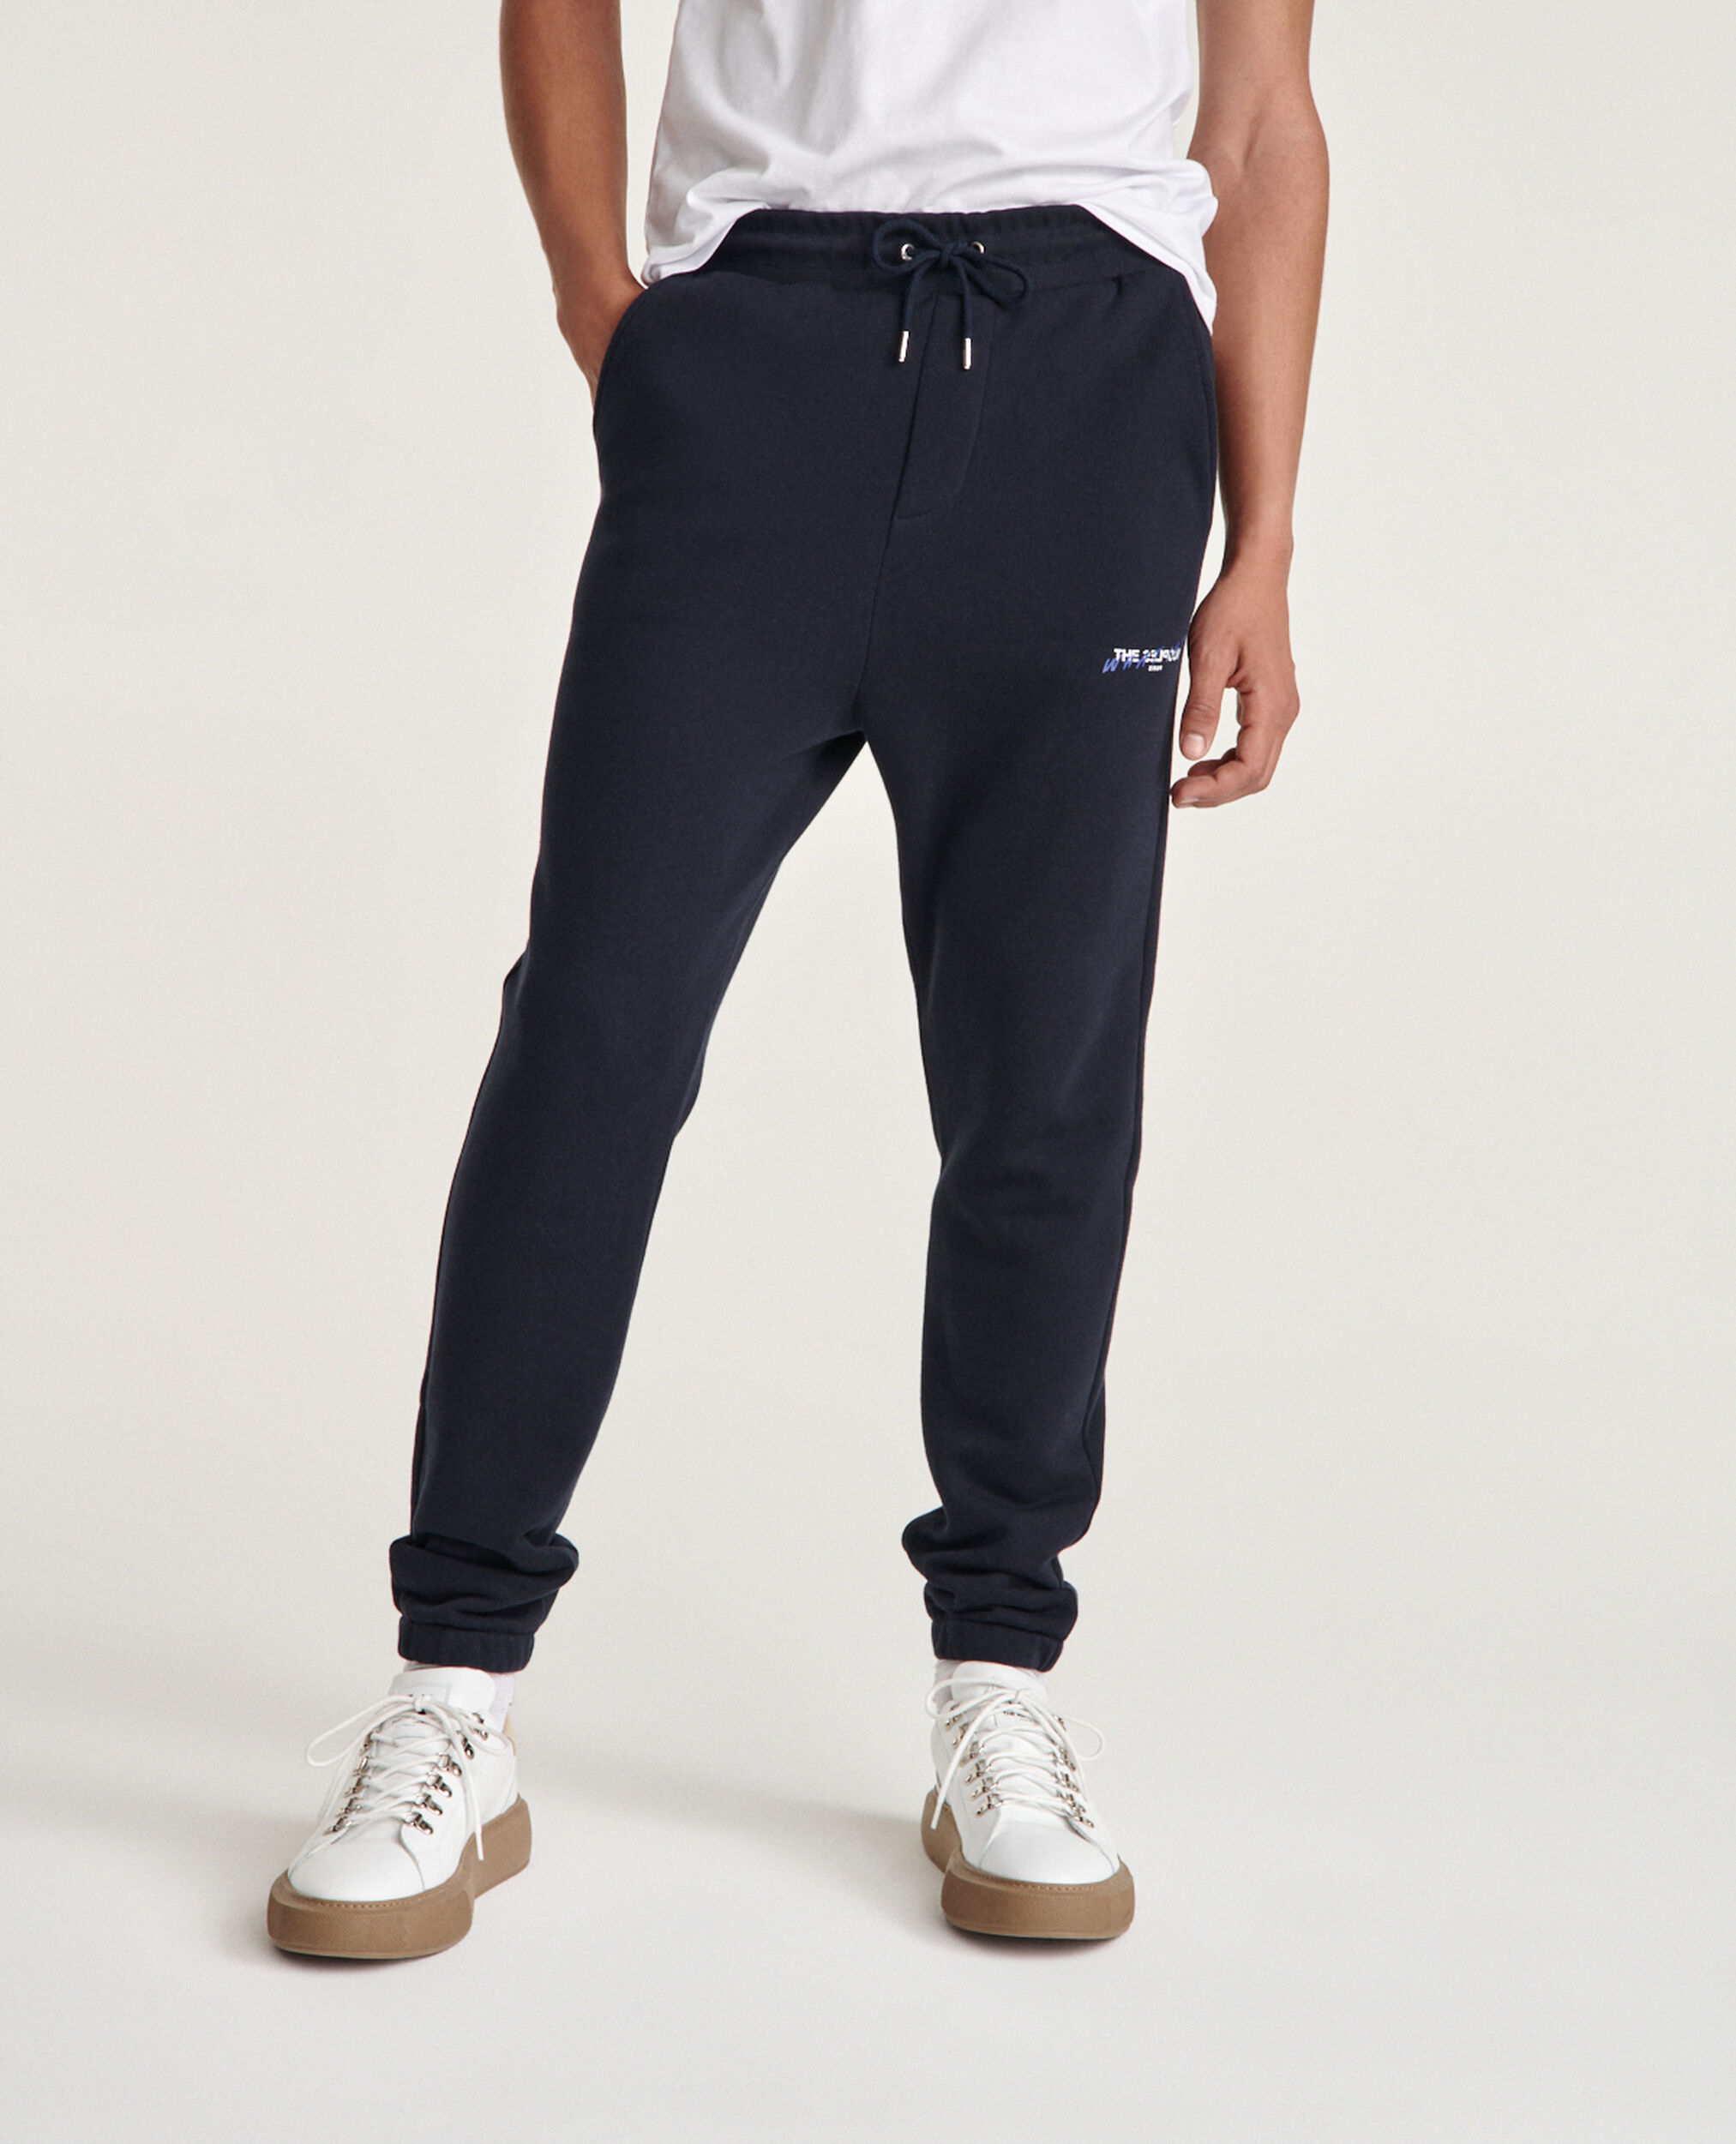 Navy jogging suit with print what is, NAVY, hi-res image number null